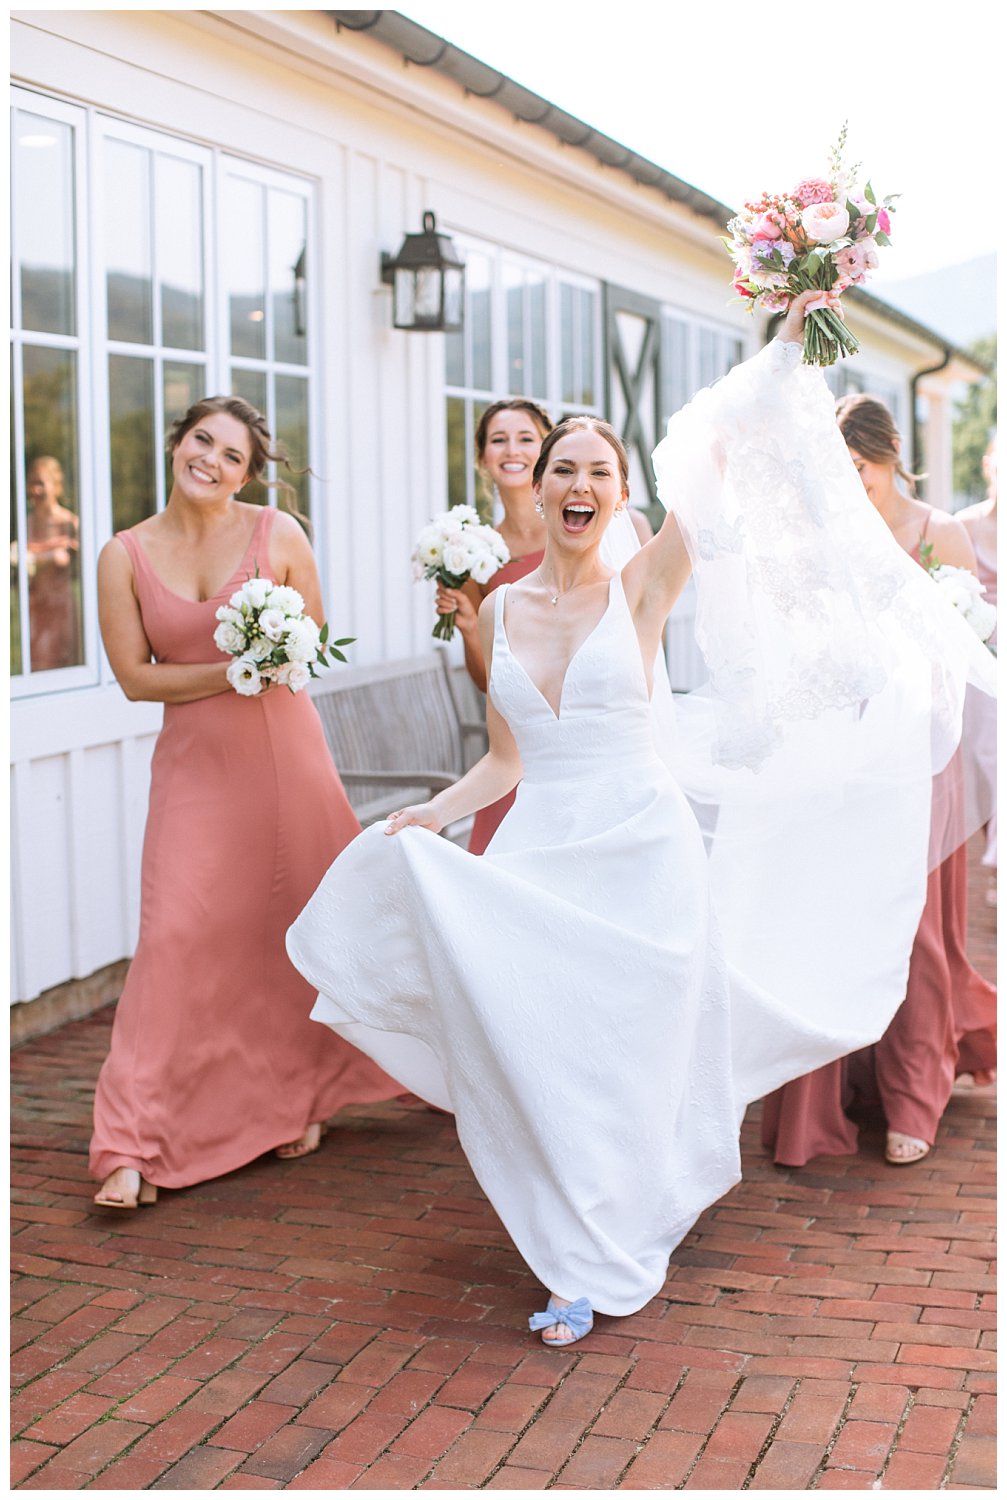 Portraits of the bride with her bridesmaids at her King Family Vineyard wedding